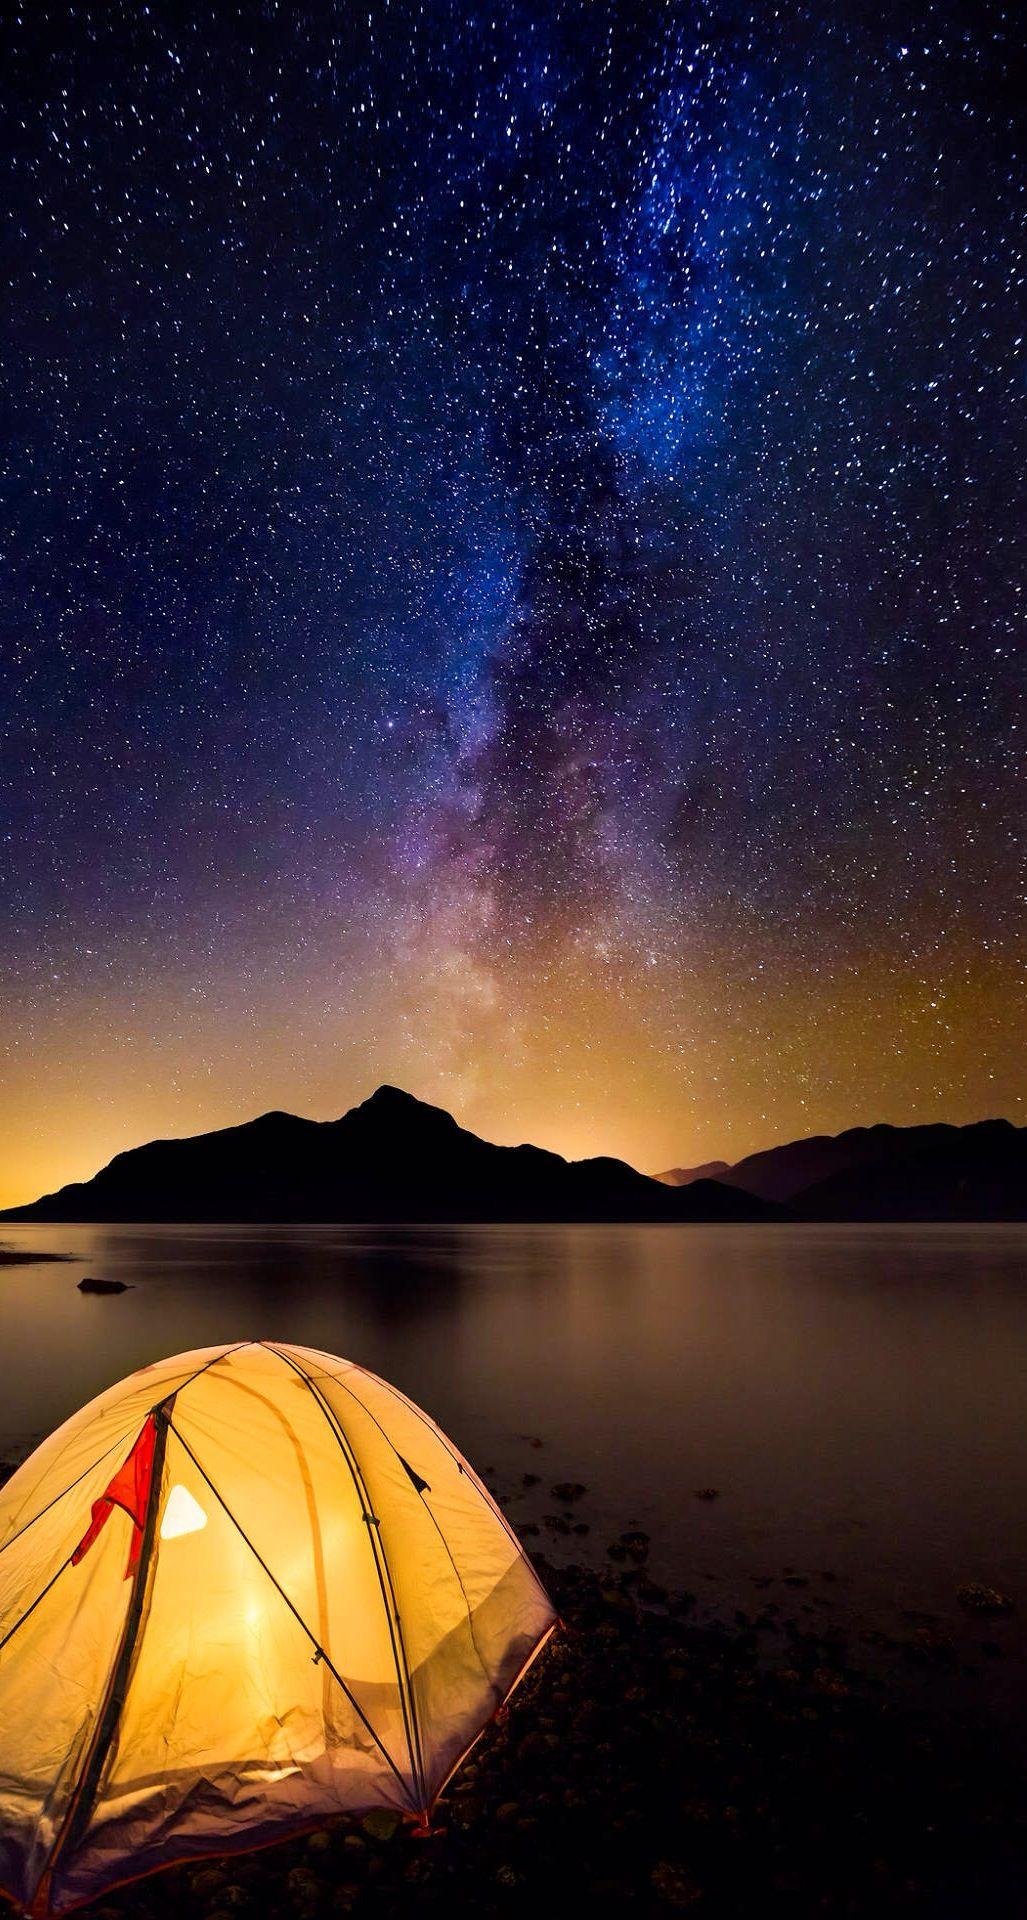 Camping under starry sky and enjoy moment of silence. Great